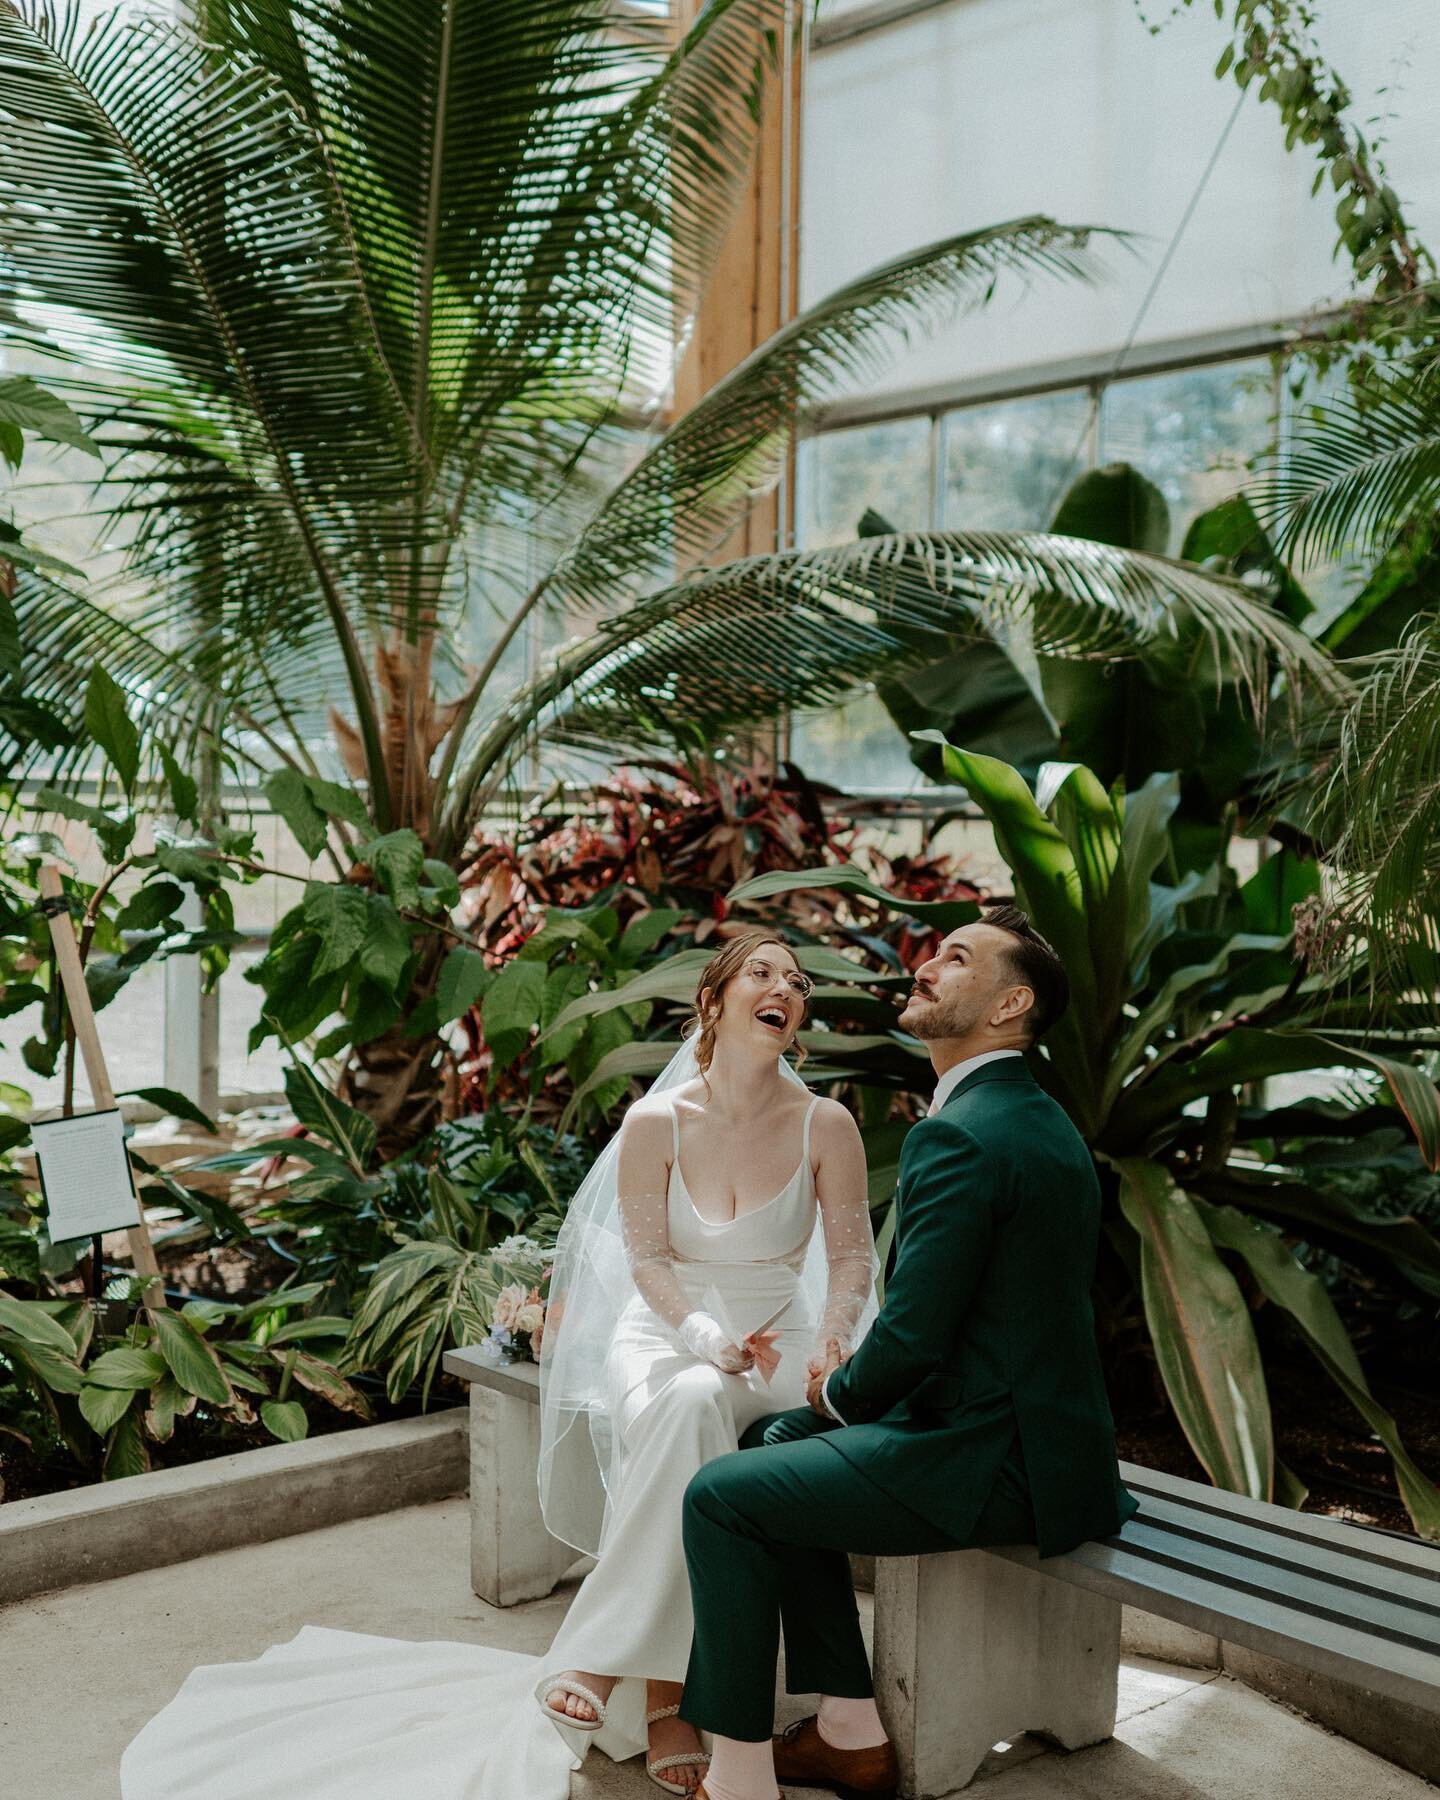 Your wedding day flies by. Everyone will tell you this. 

If you have opportunities to incorporate alone time throughout your day (even if only for 10 mins) do it! 

Sarah and Alex chose to have a very intimate wedding day with no wedding party. They